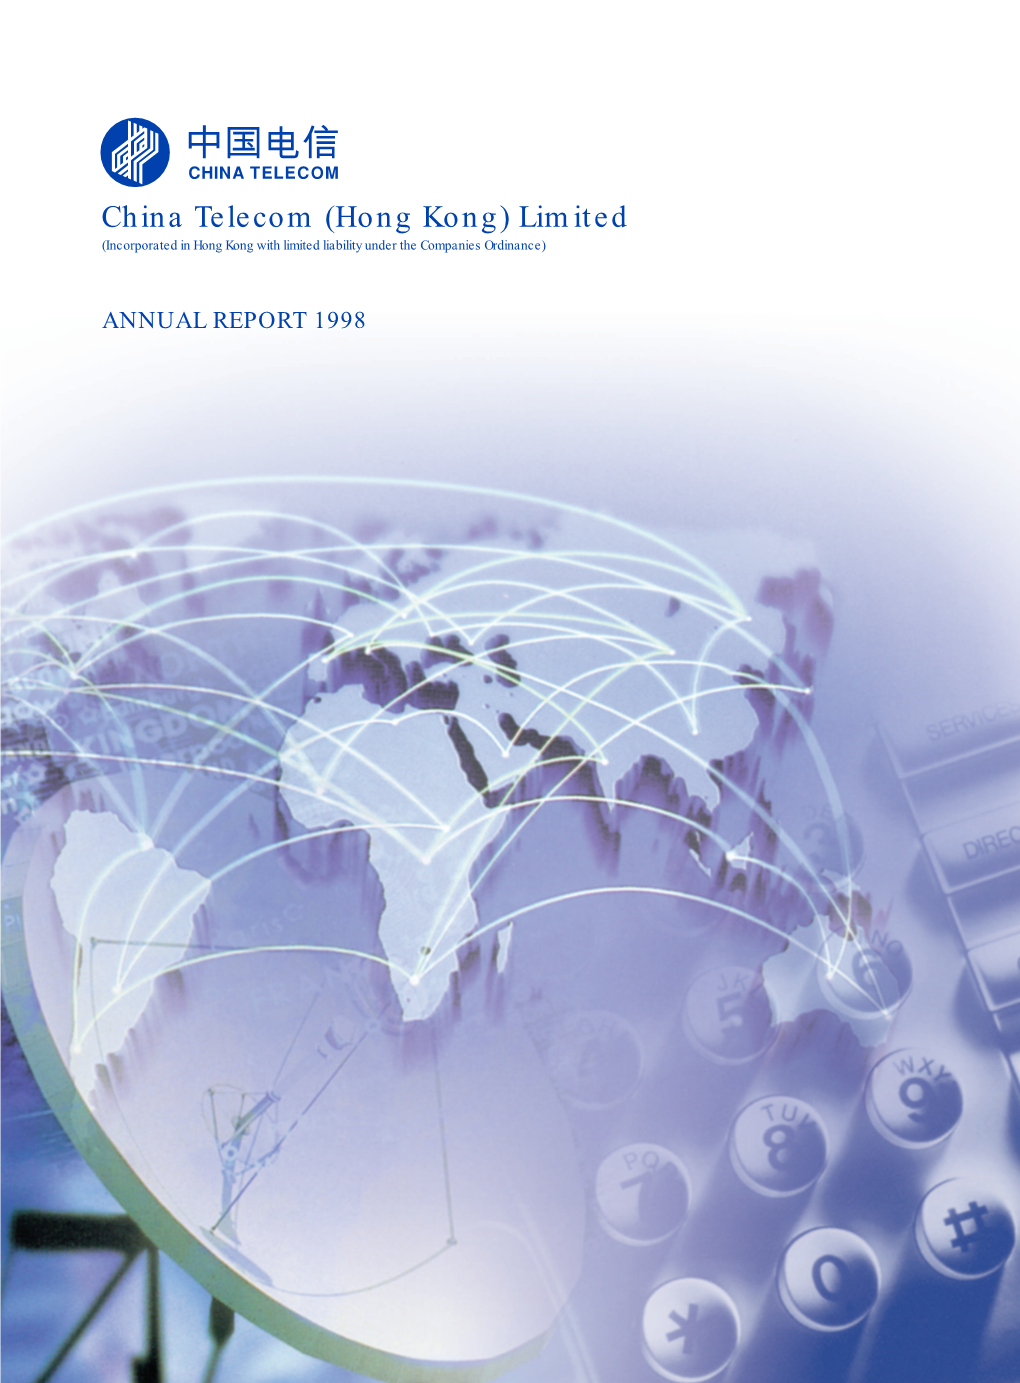 China Telecom (Hong Kong) Limited (Incorporated in Hong Kong with Limited Liability Under the Companies Ordinance)